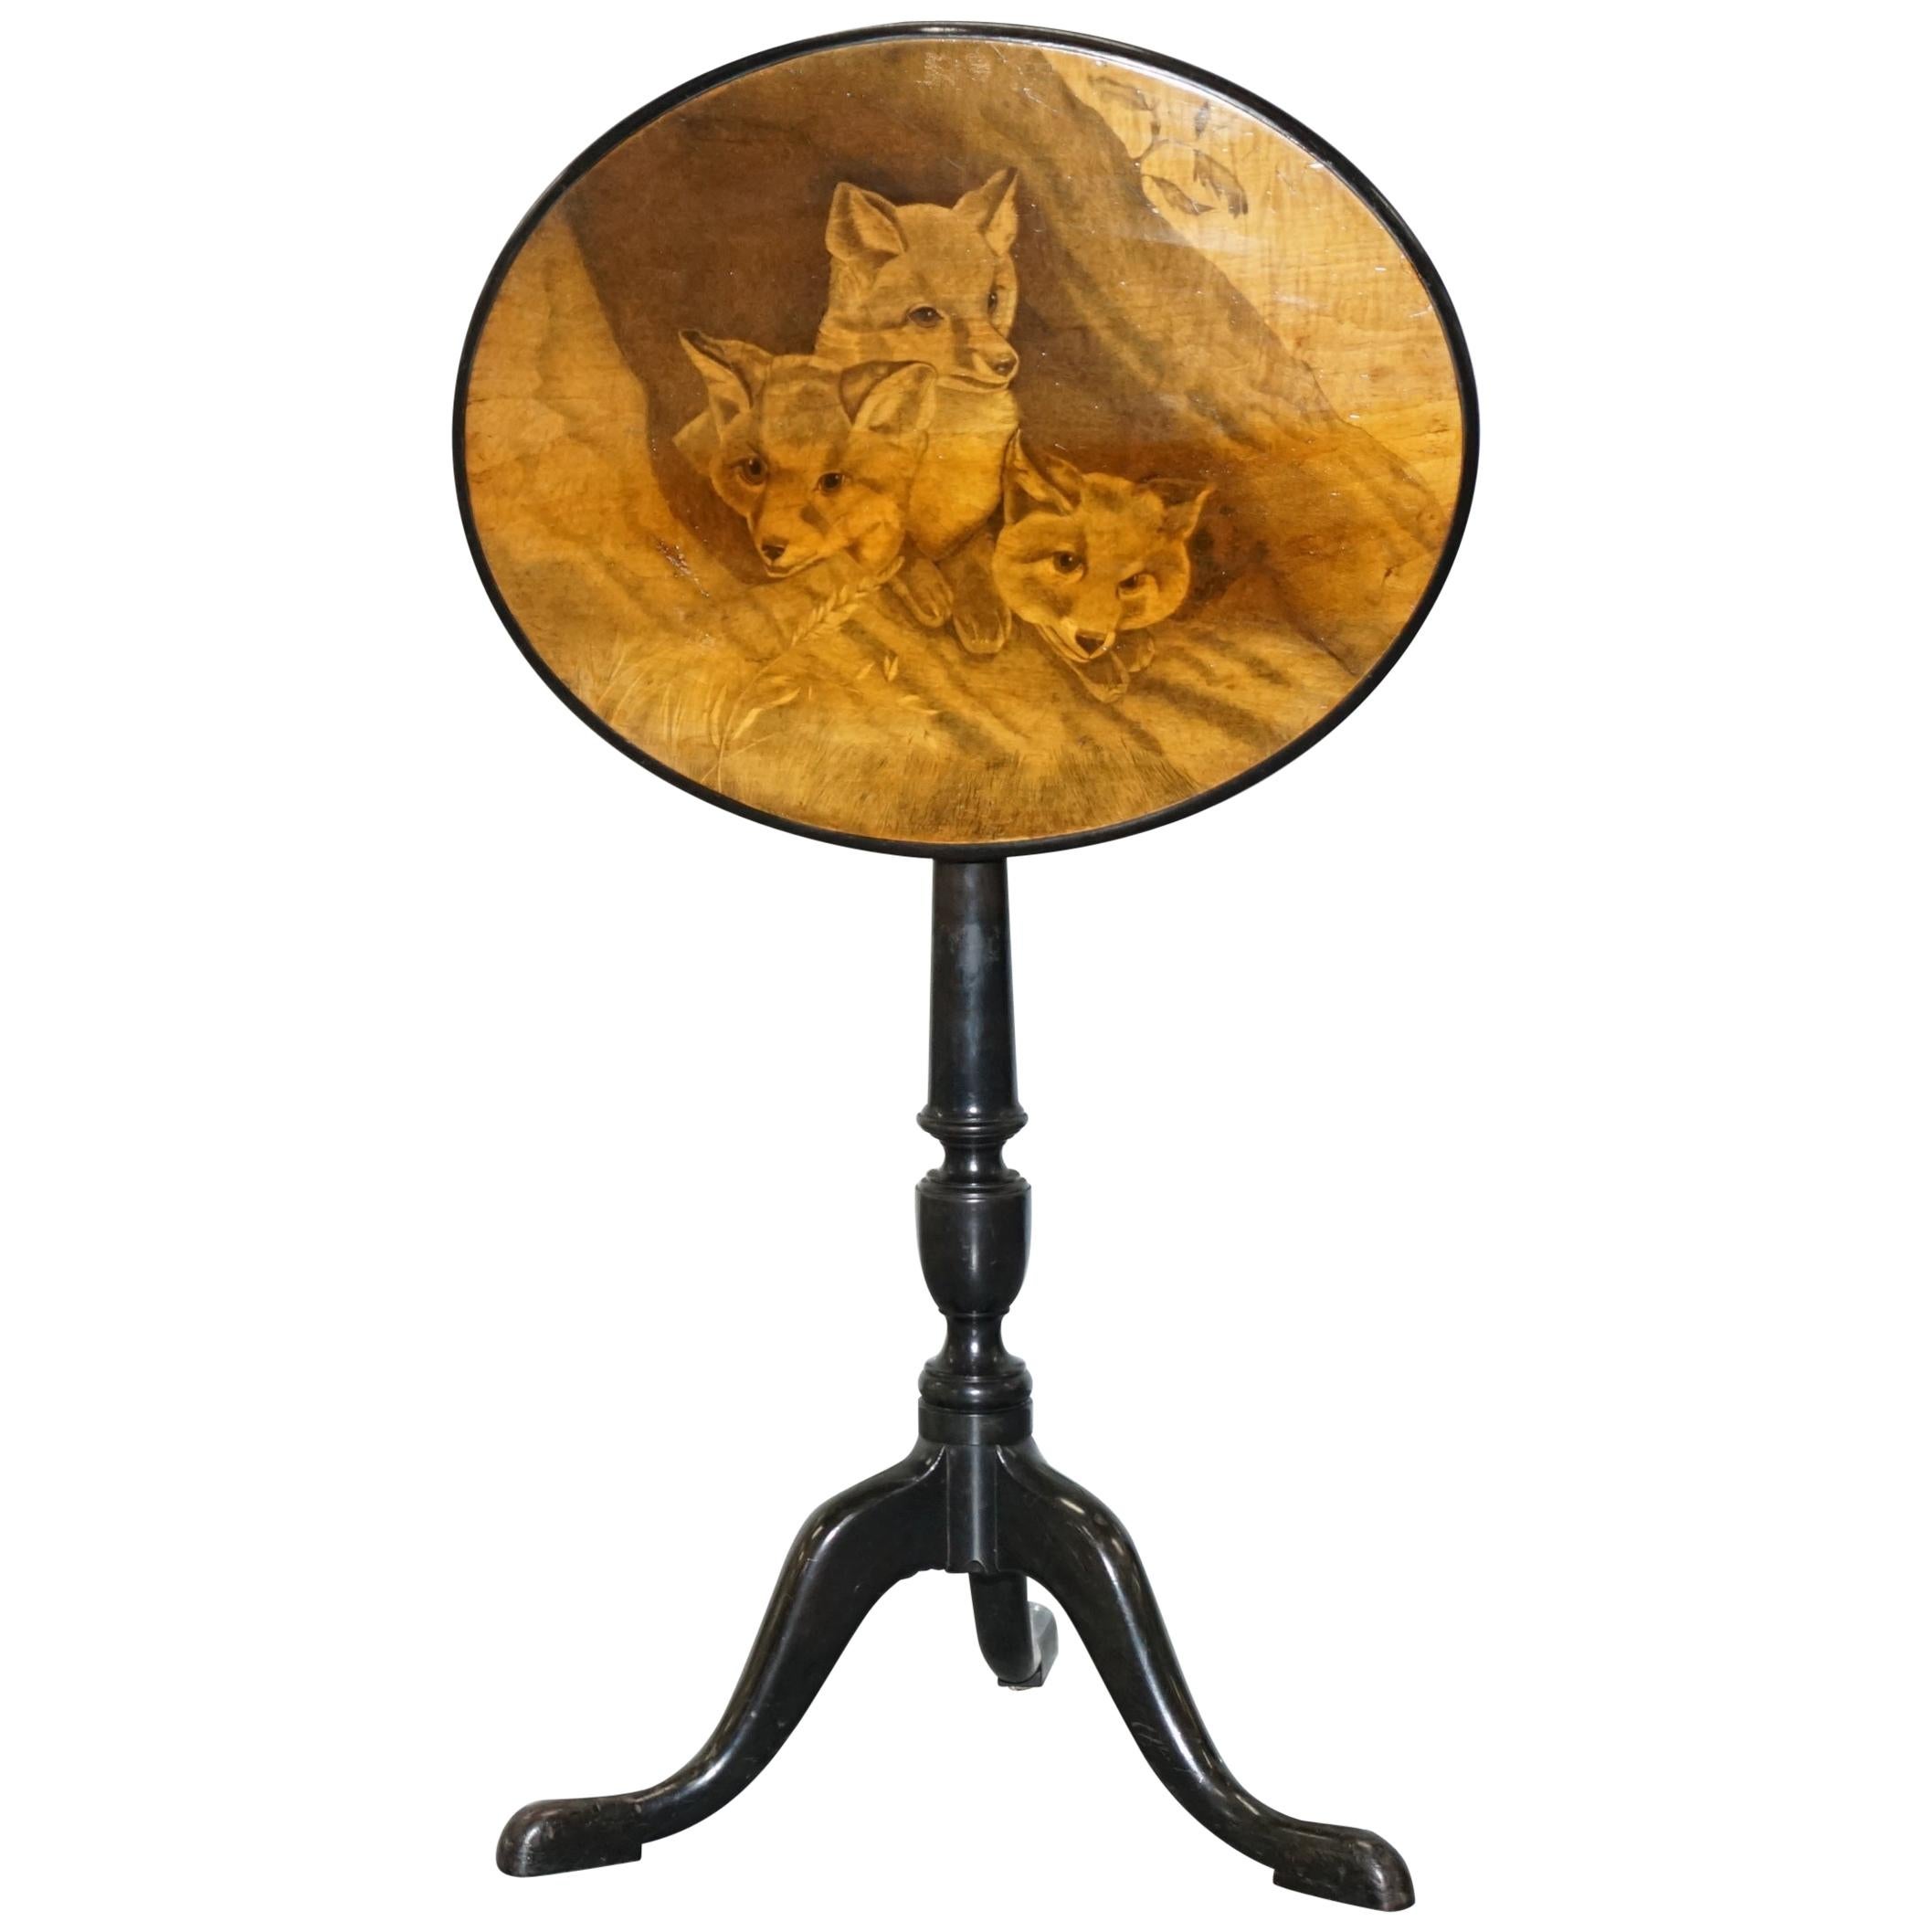 Very Rare Victorian Tilt Top Ebonised Table with Pen Work Drawings of Fox Cubs